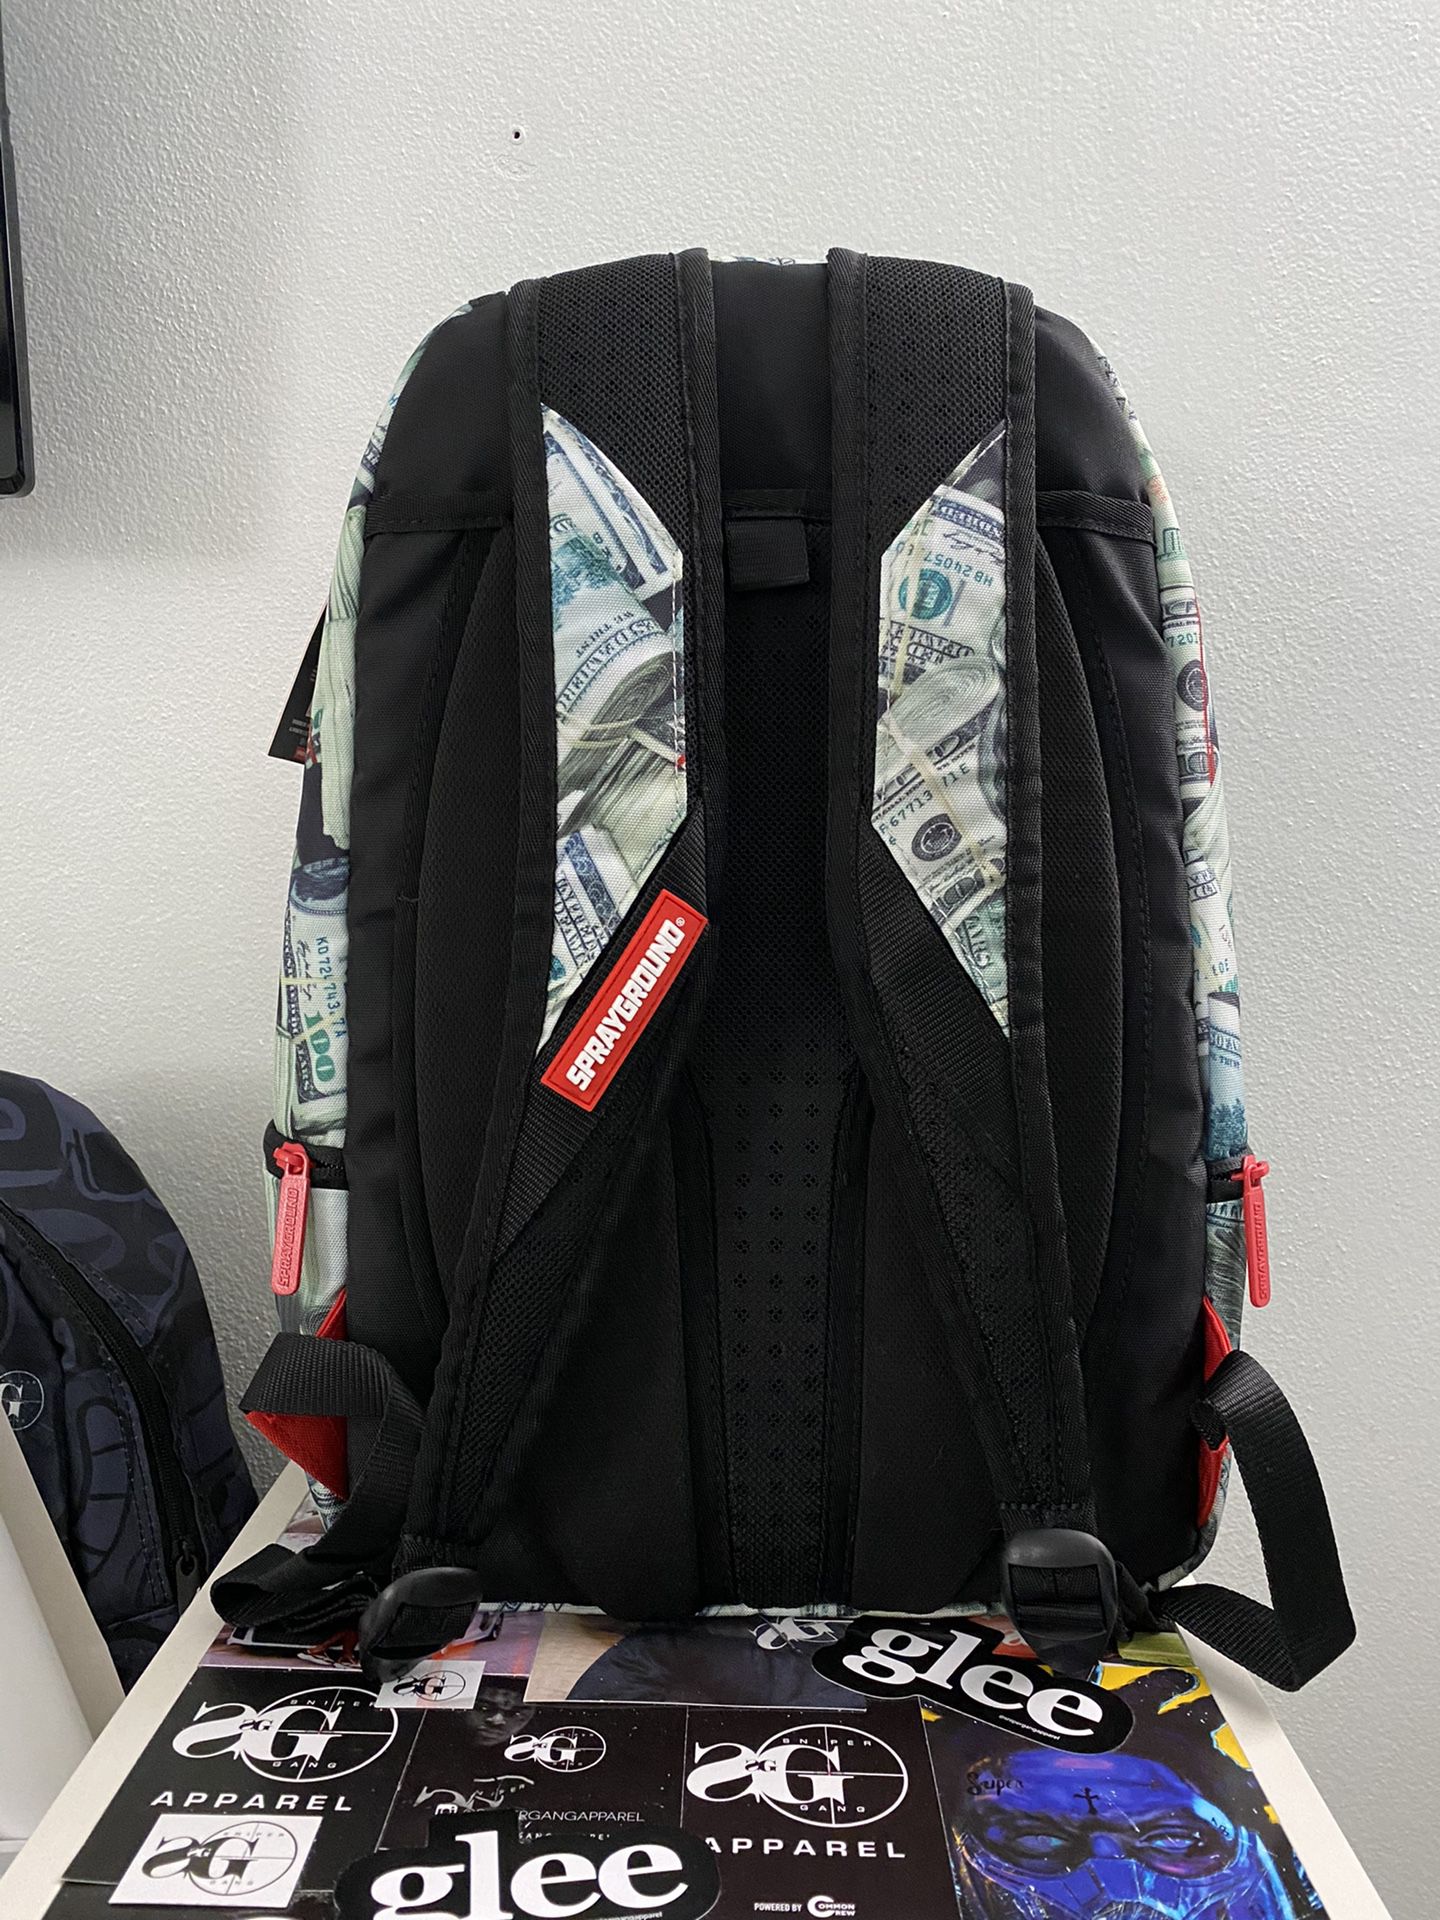 Valentino Backpack by Mario Valentino New for Sale in North Miami Beach, FL  - OfferUp